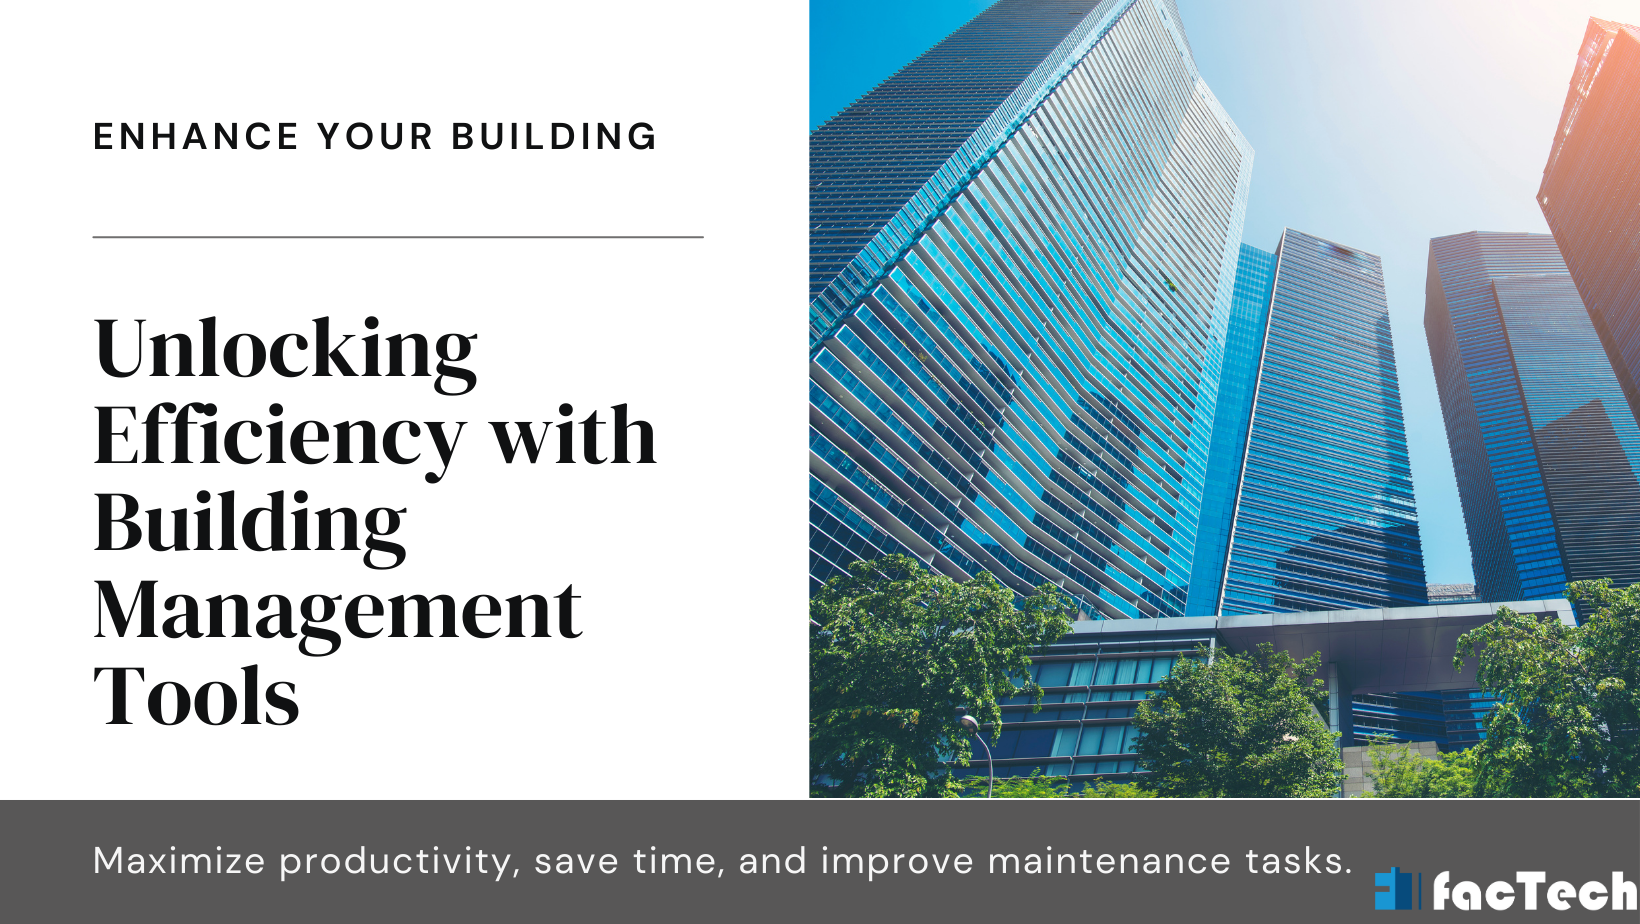 Unlocking Efficiency with Building Management Tools